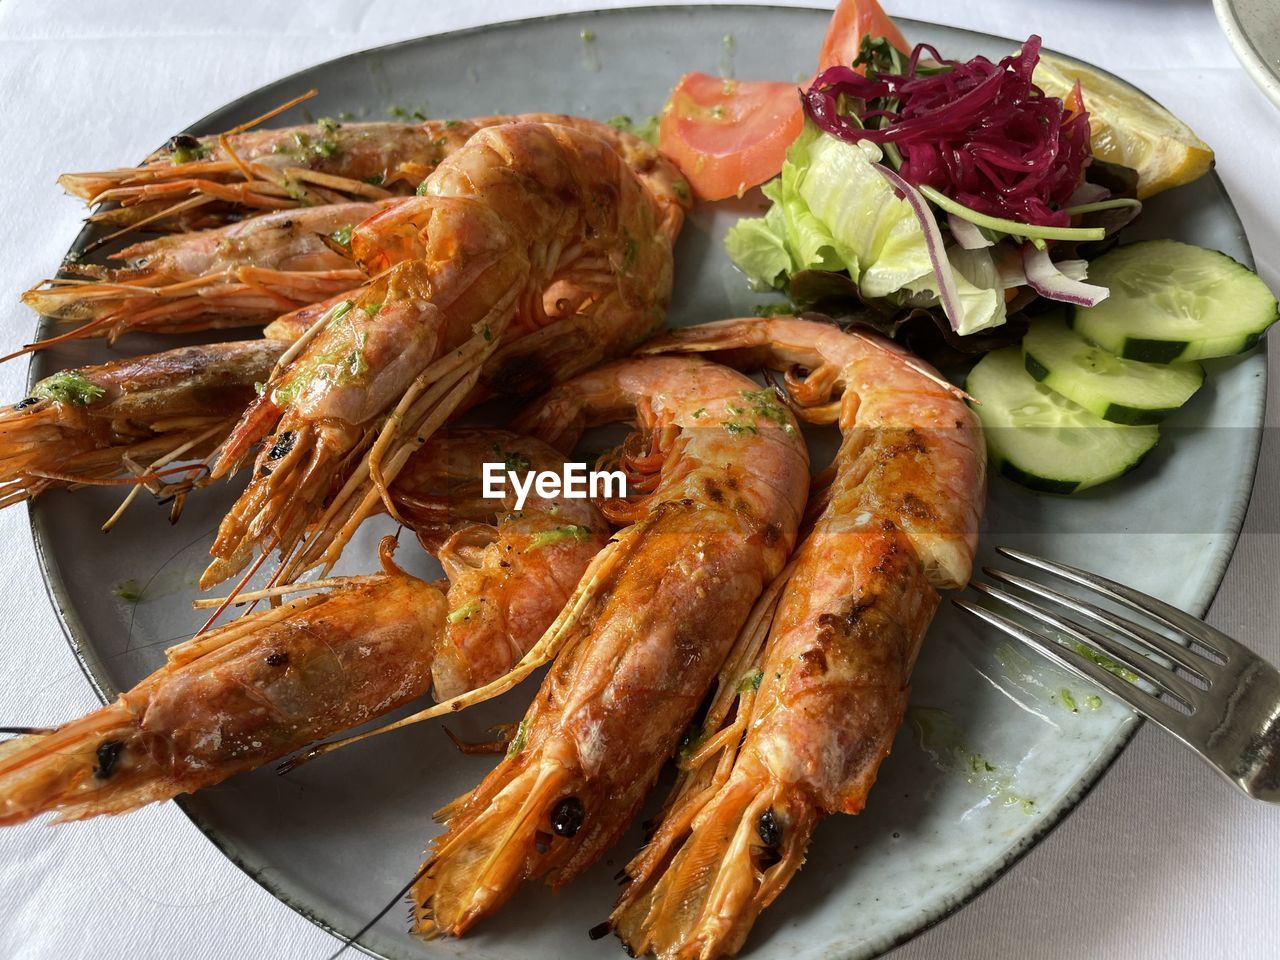 View of meal served in plate, shrimp 